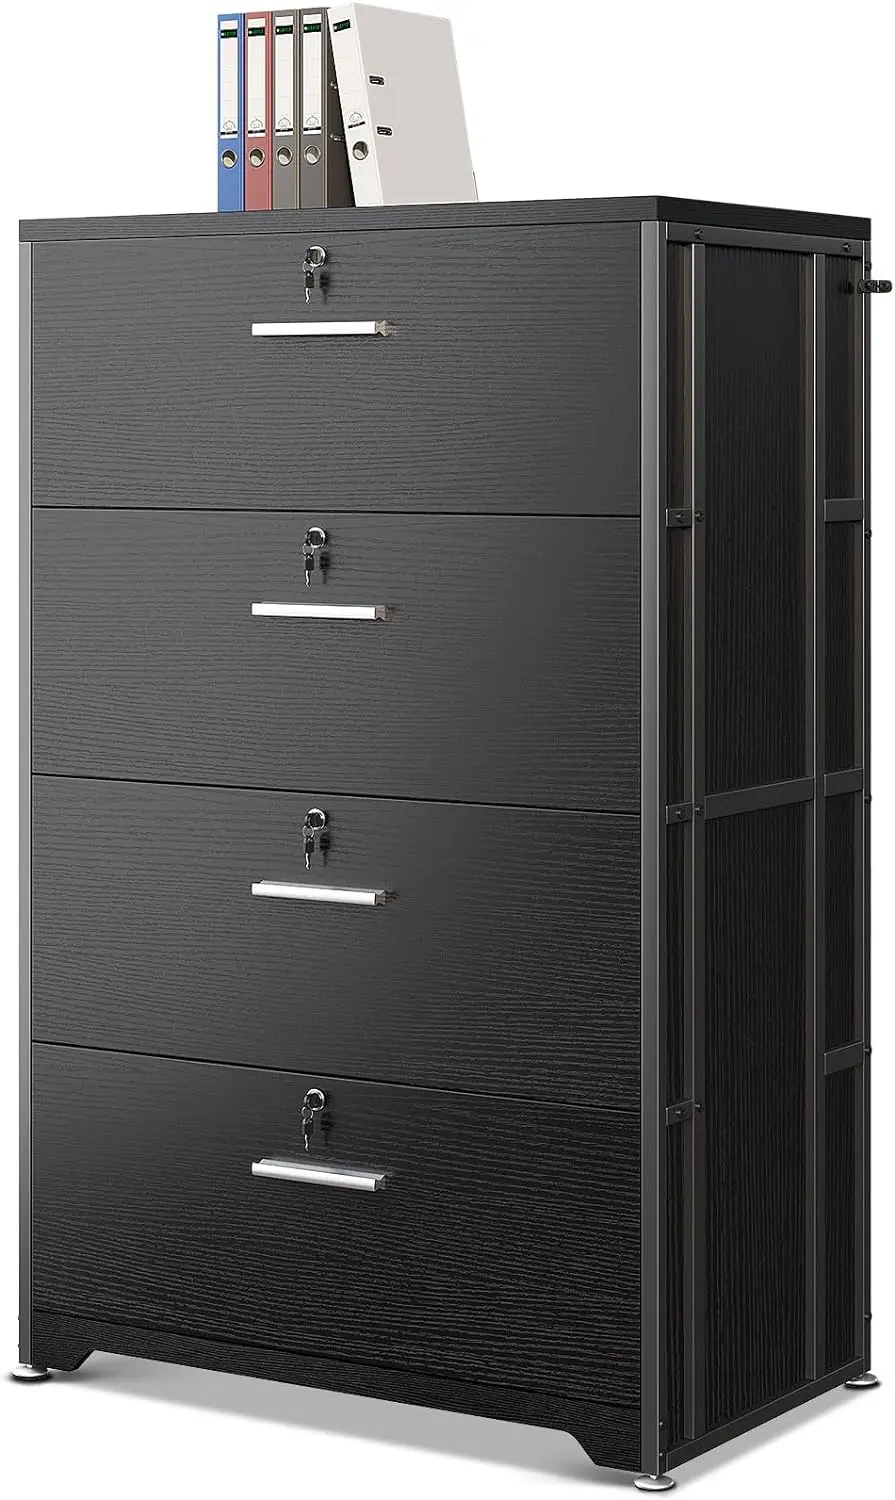 AODK File Cabinet Filing Cabinet for Home Office, Large File Cabinets with Lock, Office Storage Cabinet 4 Drawer for Legal/Lette lettres planos papeles de madera printer shelf archivero archivadores mueble archivador para oficina filing cabinet for office